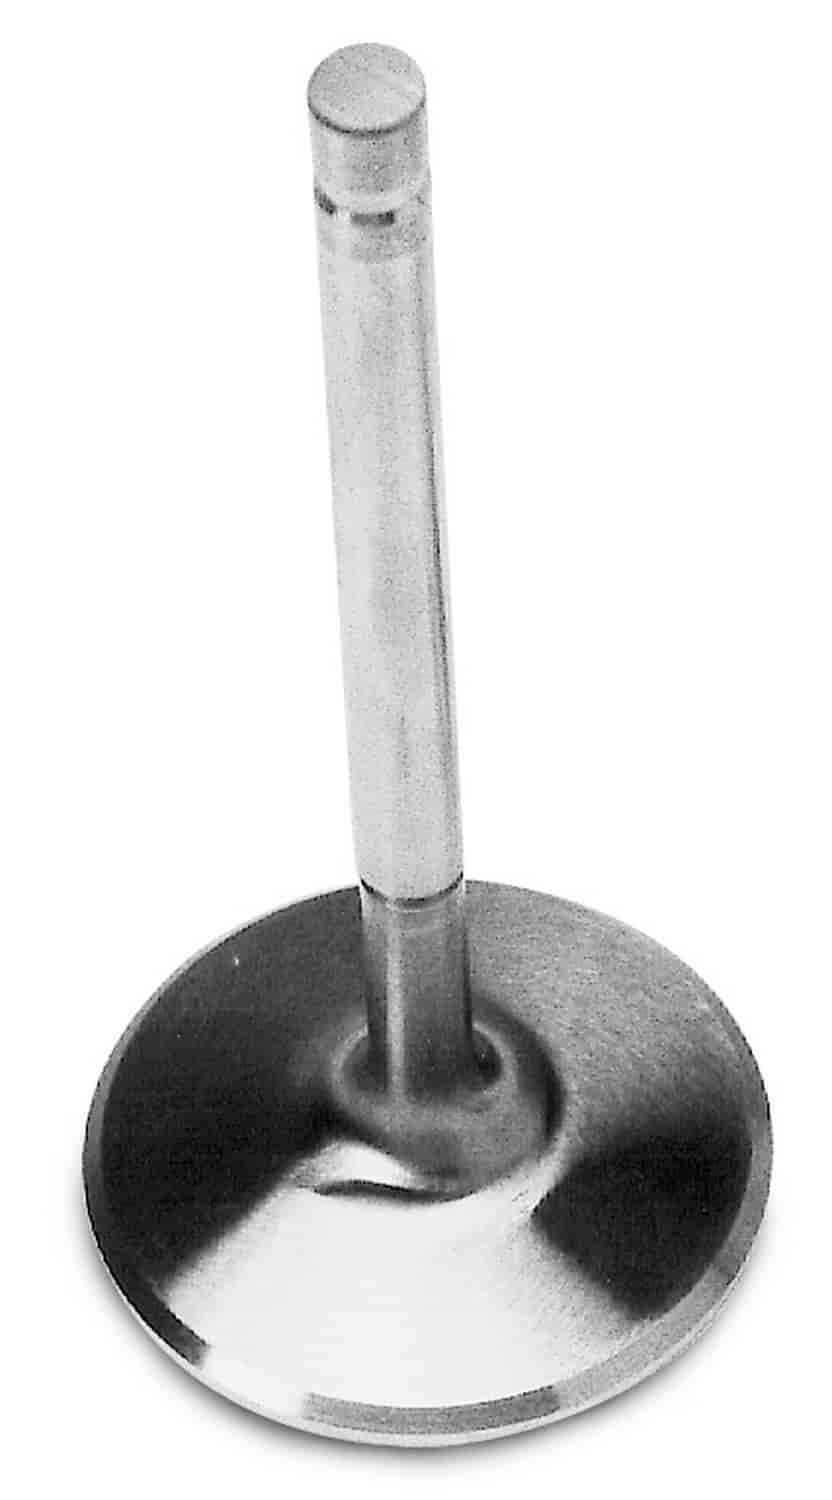 Single Intake Valve 2.02" for AMC, Small Block Chevy & Ford